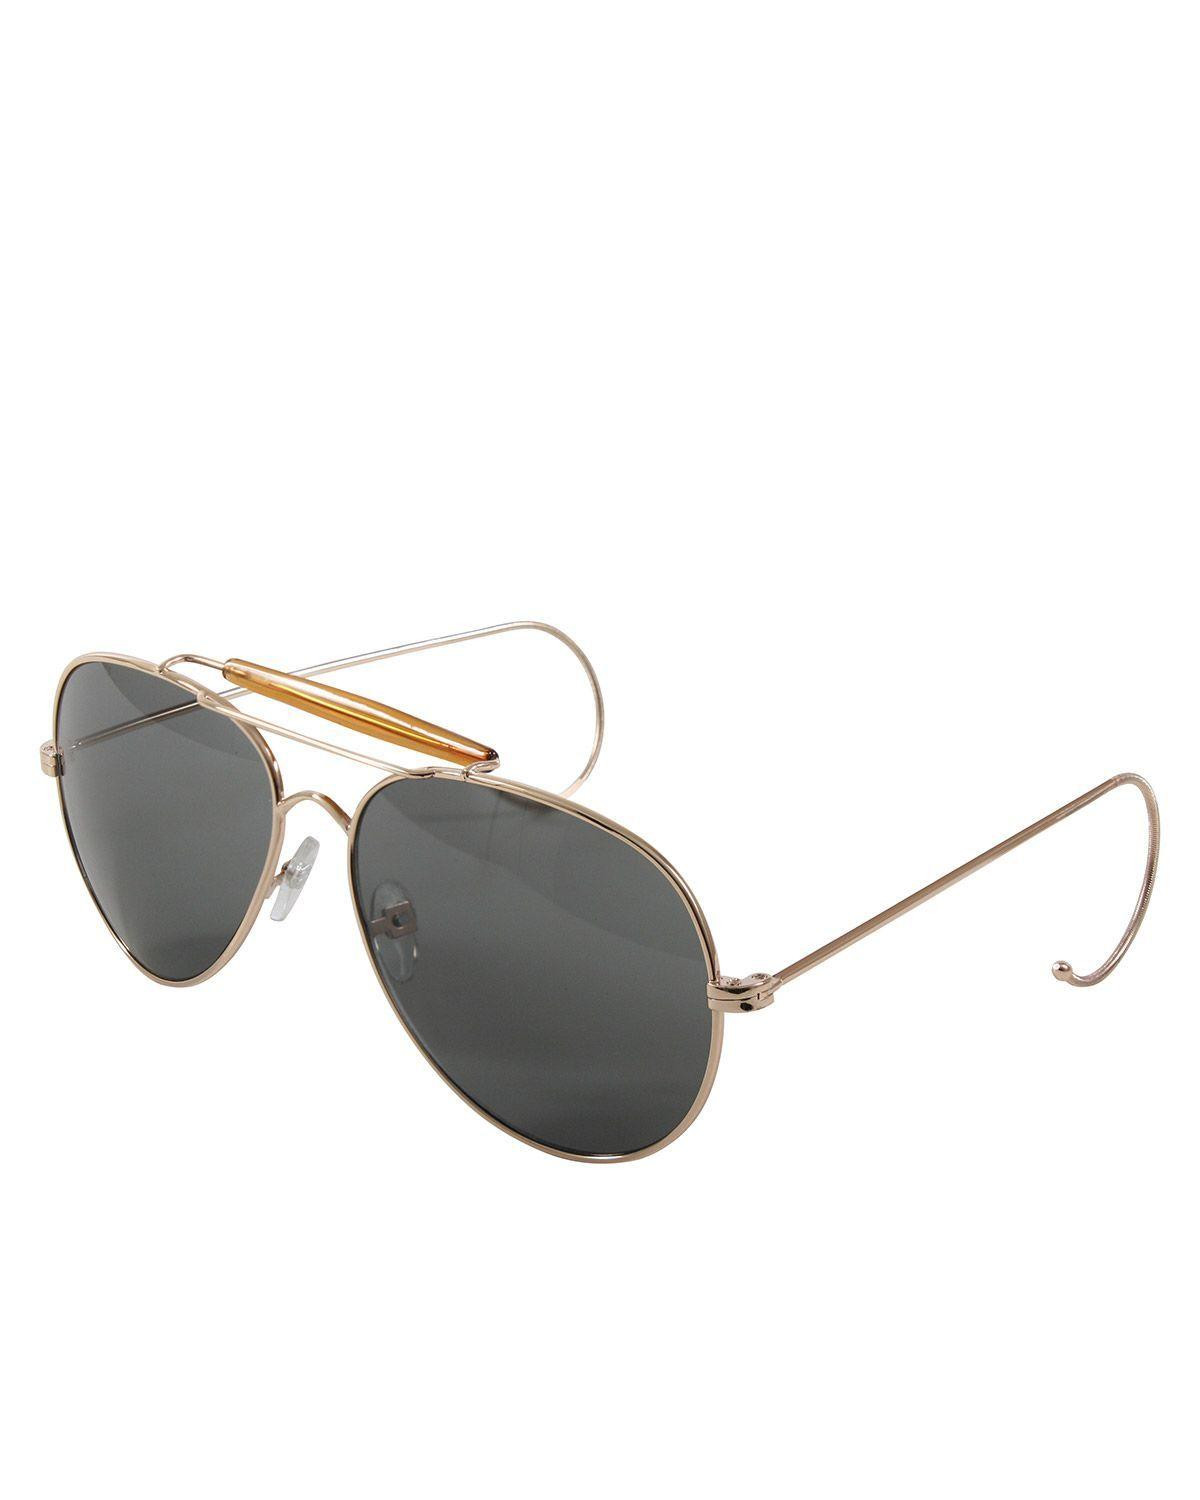 11: Rothco Air Force Pilot Solbriller - G.I. Type (Guld m. Røget Glas, One Size)